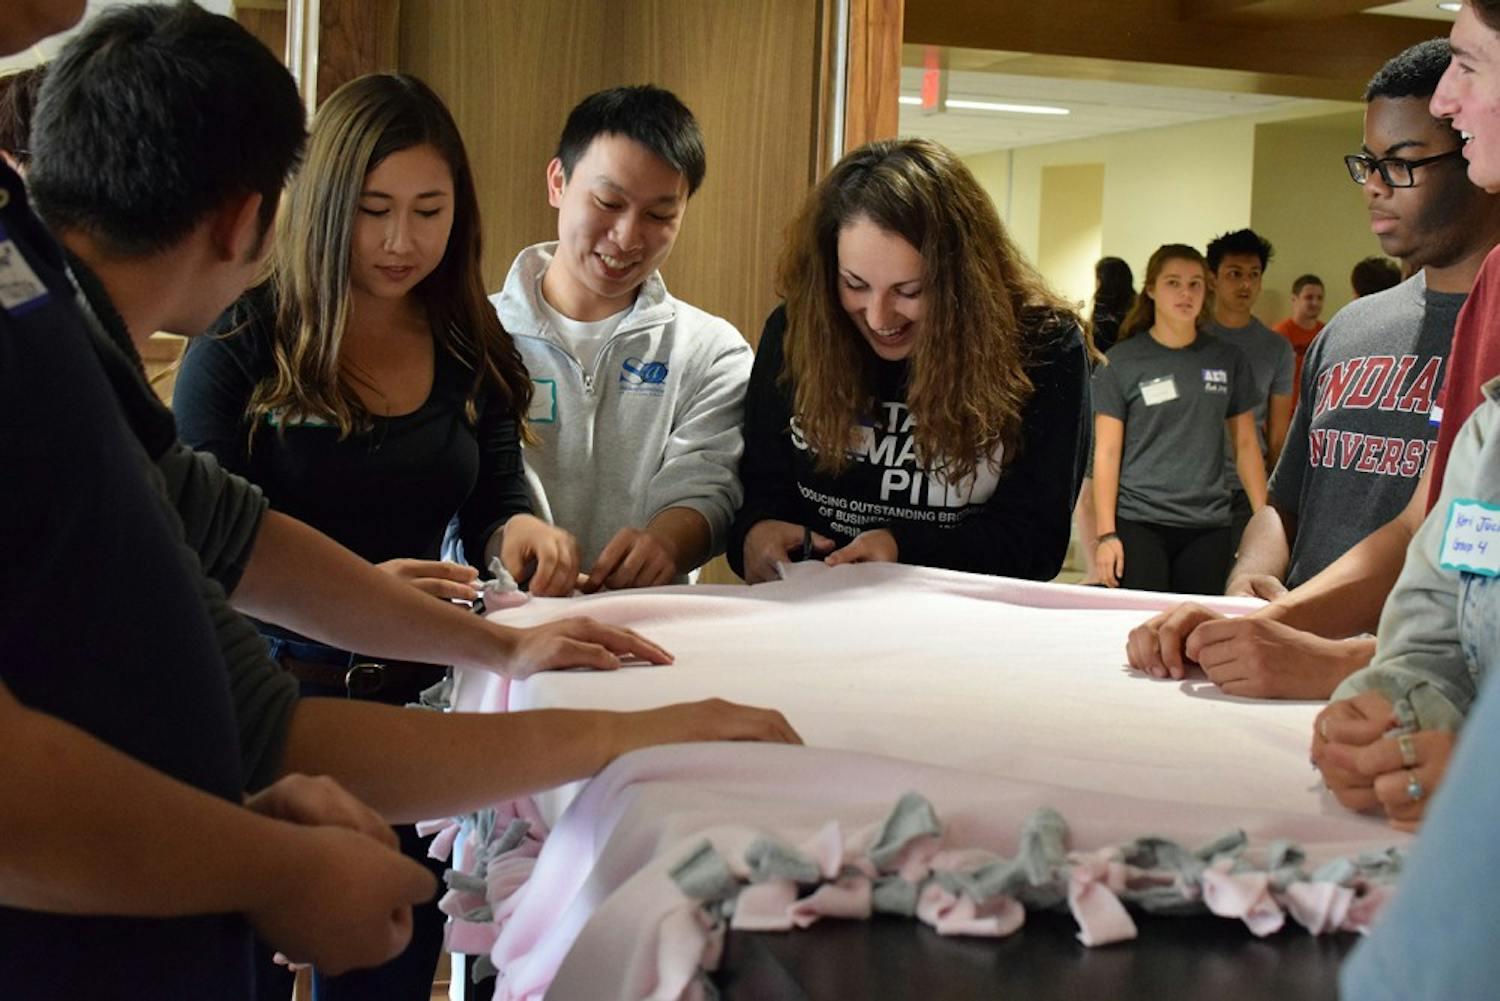 Rushing junior Matt Cheong and senior member Jamie Ventin cut the edges of a fleece blanket at the Delta Sigma Pi Community Service Event in Hodge Hall September 14, 2015. The event was part of the fraternity's Fall 2015 Rush schedule and the IFC is preparing to begin their new rushing process in September.